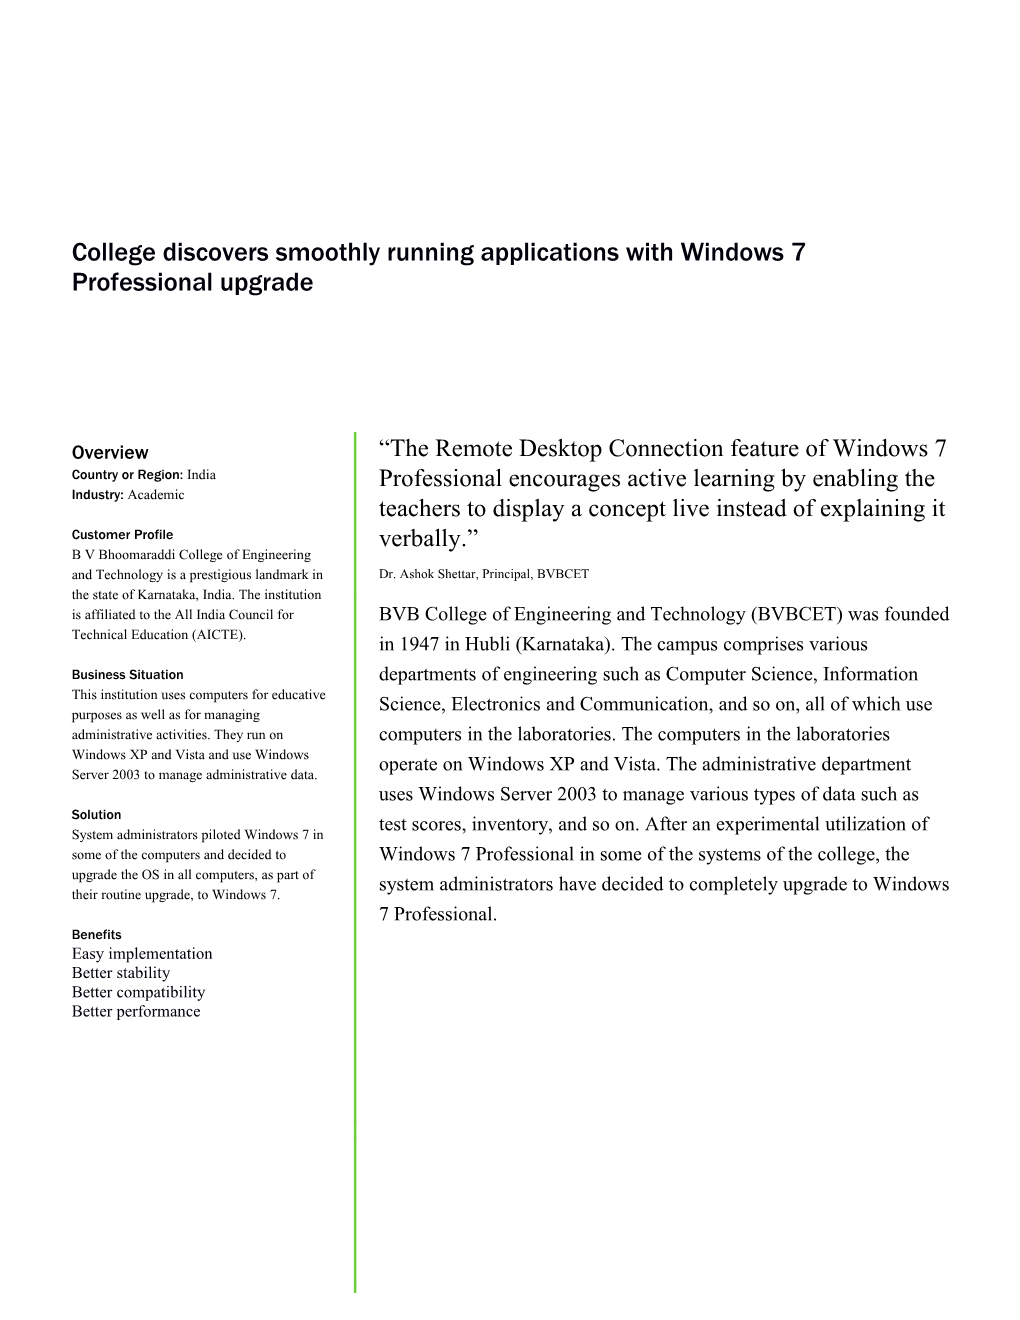 Writeimage CEP College Discovers Smoothly Running Applications with Windows 7 Professional